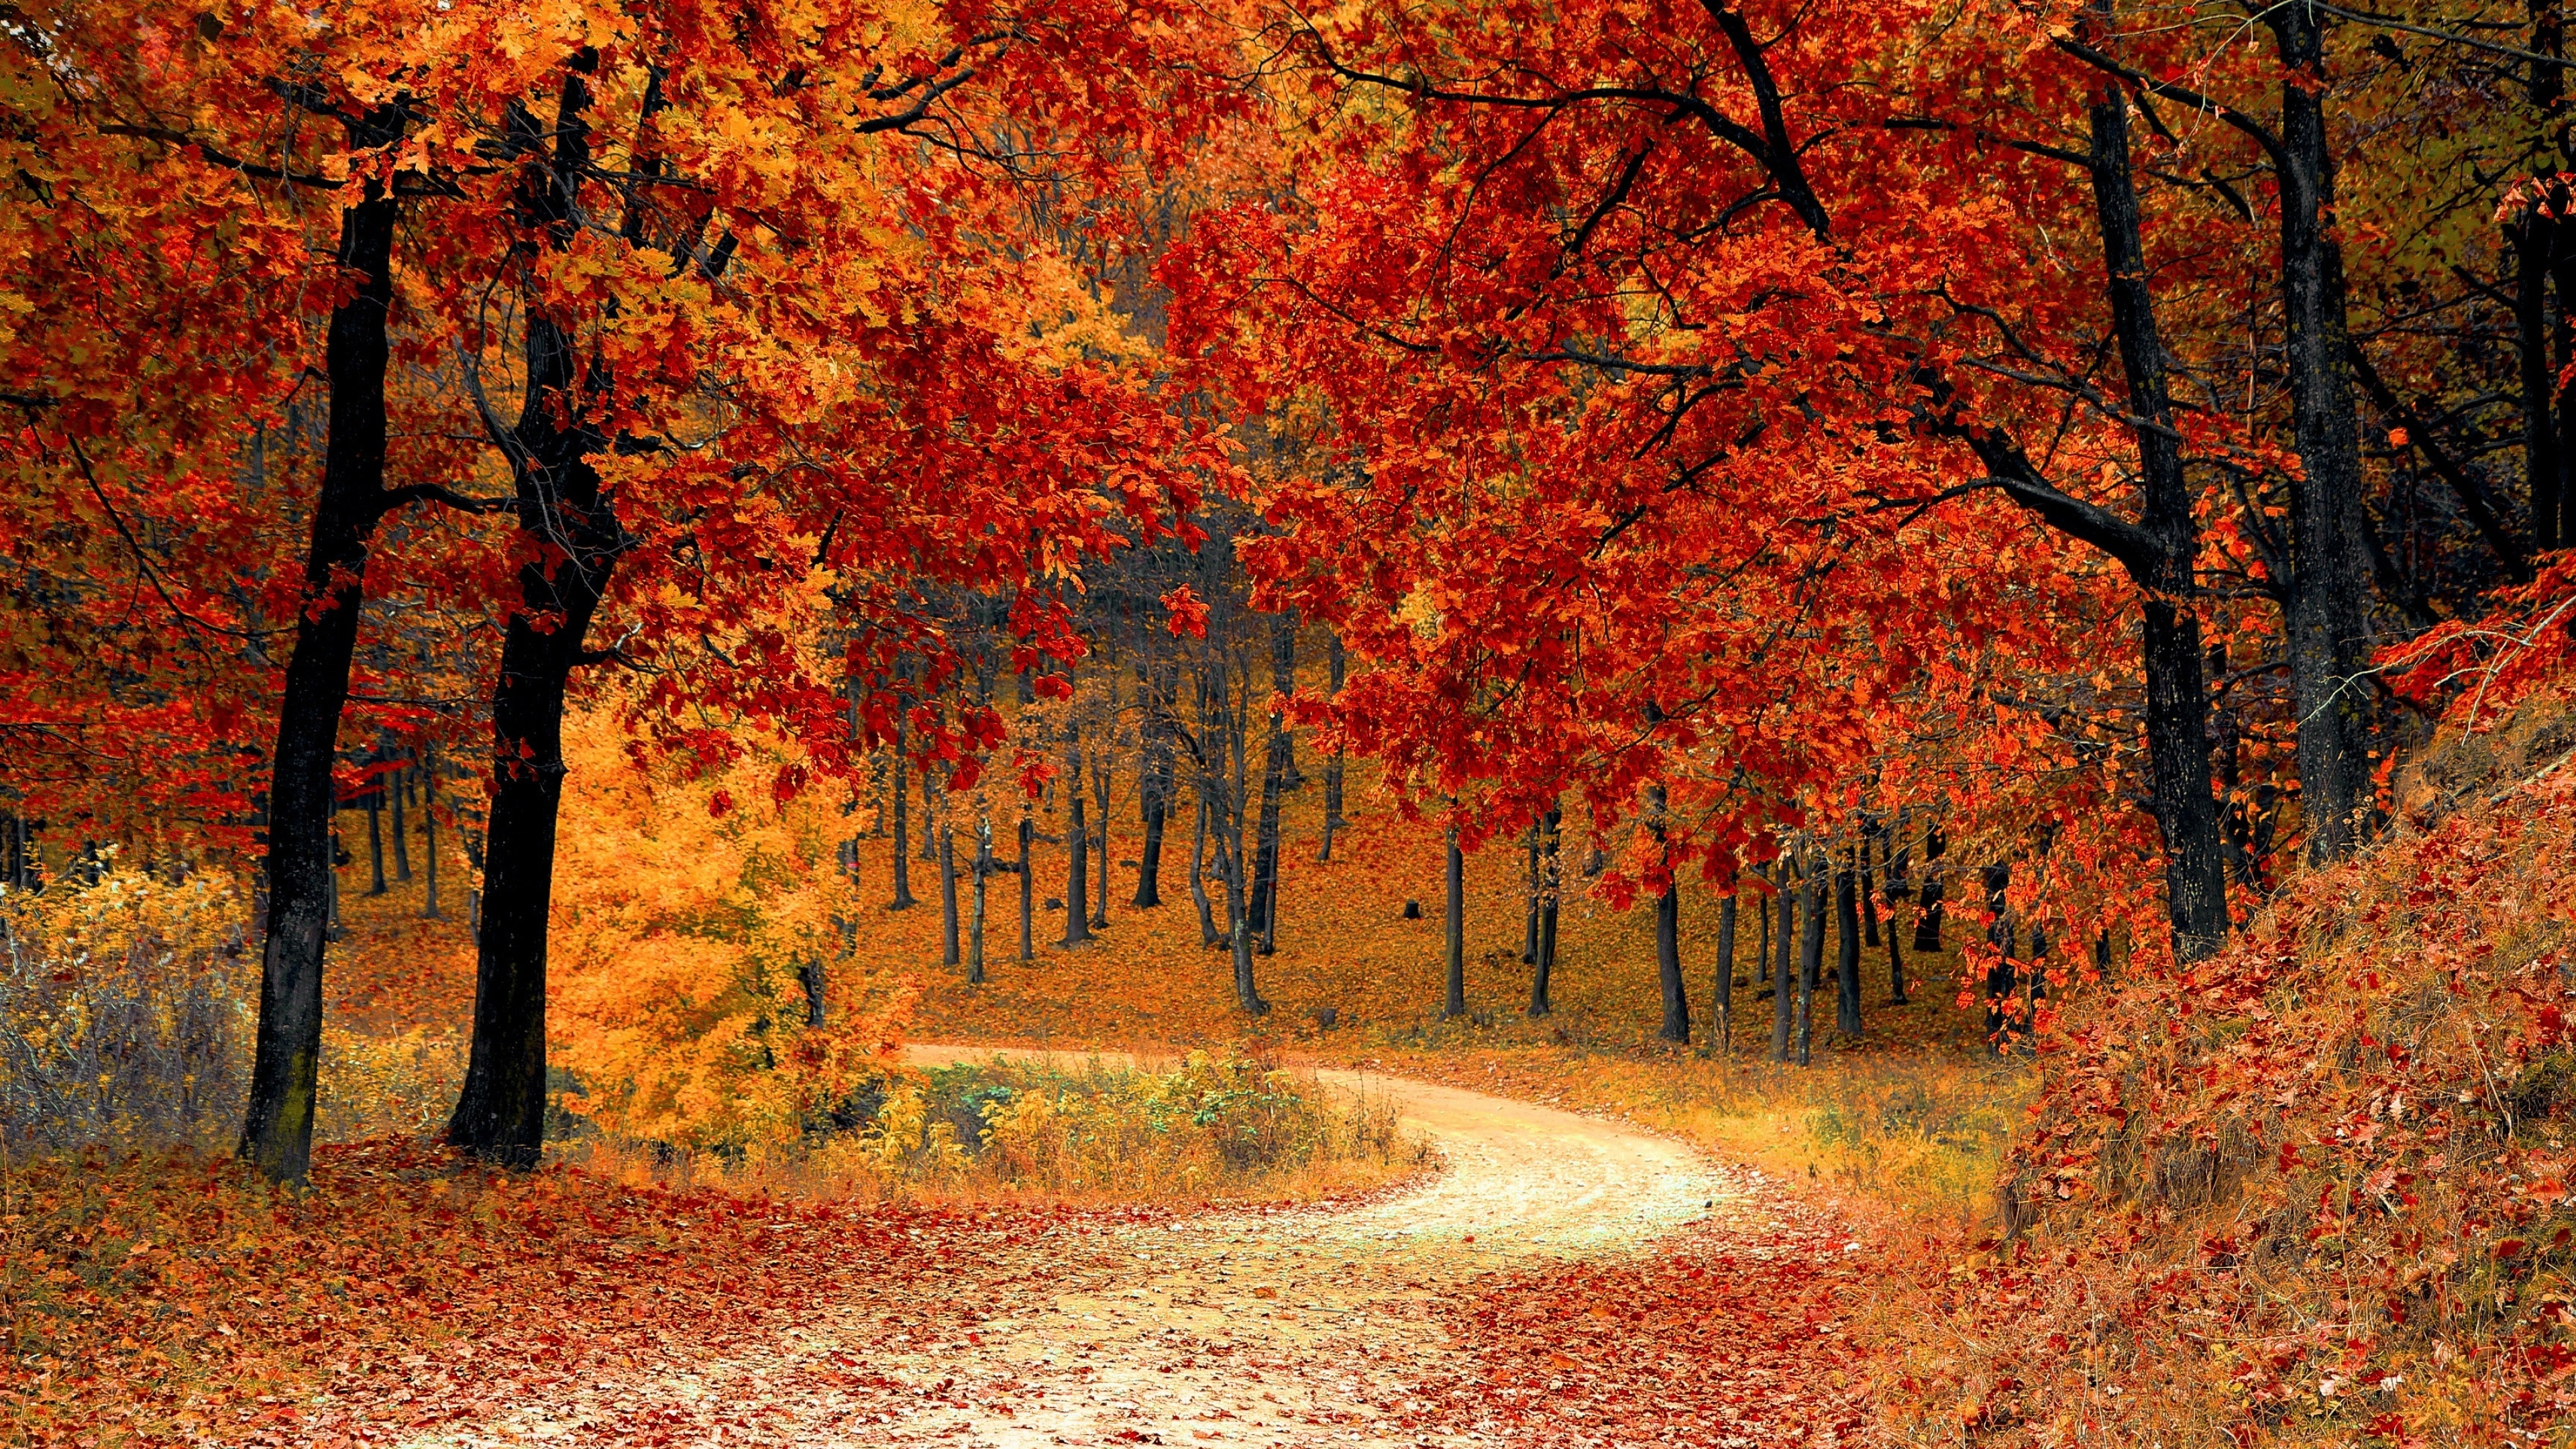 Red leaf spectacle, Autumn pathway, Season's richness, Cool retreat, October dream, 3840x2160 4K Desktop